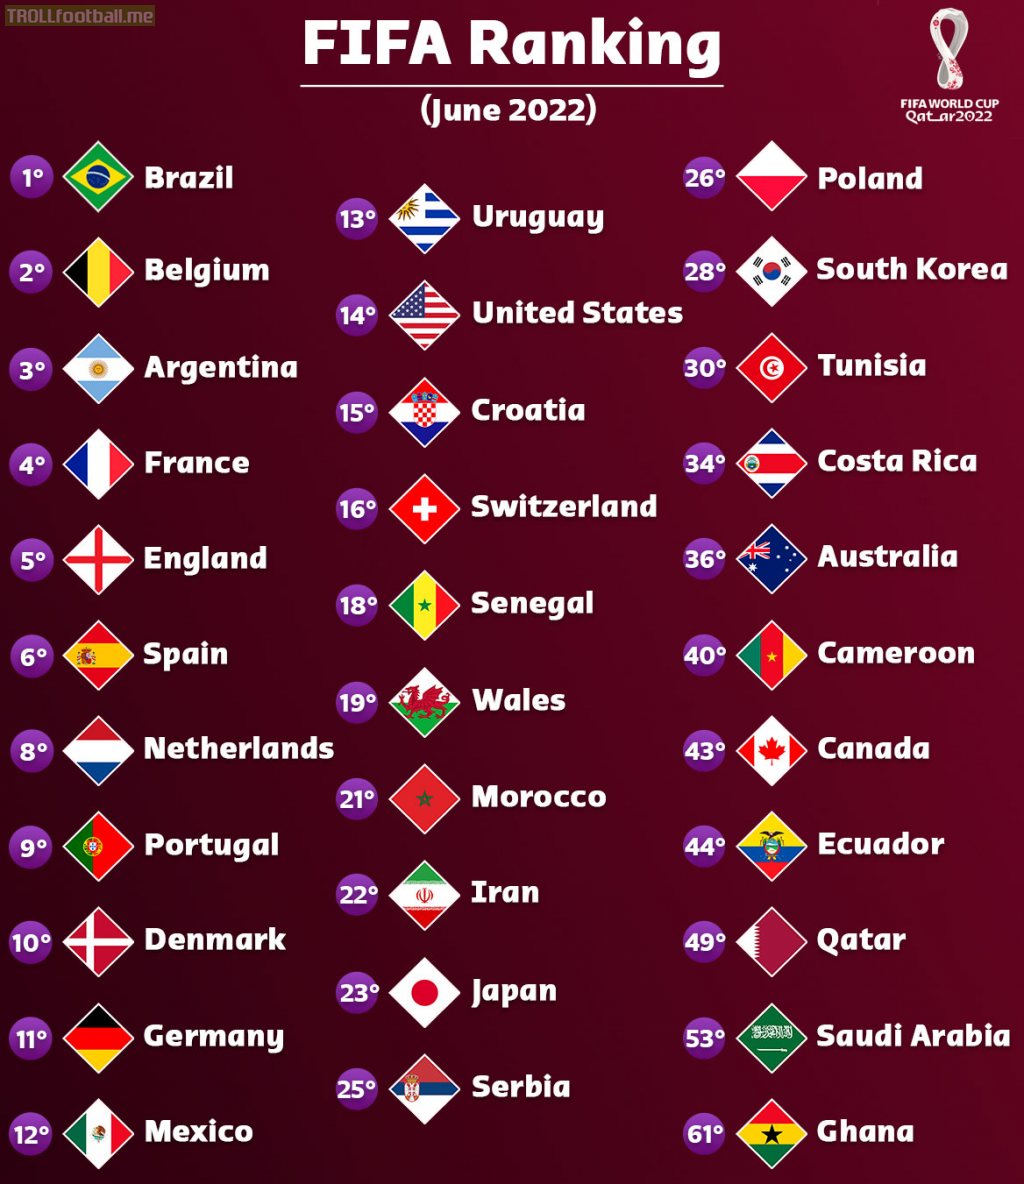 Latest FIFA Ranking of qualified teams for the 2022 World Cup